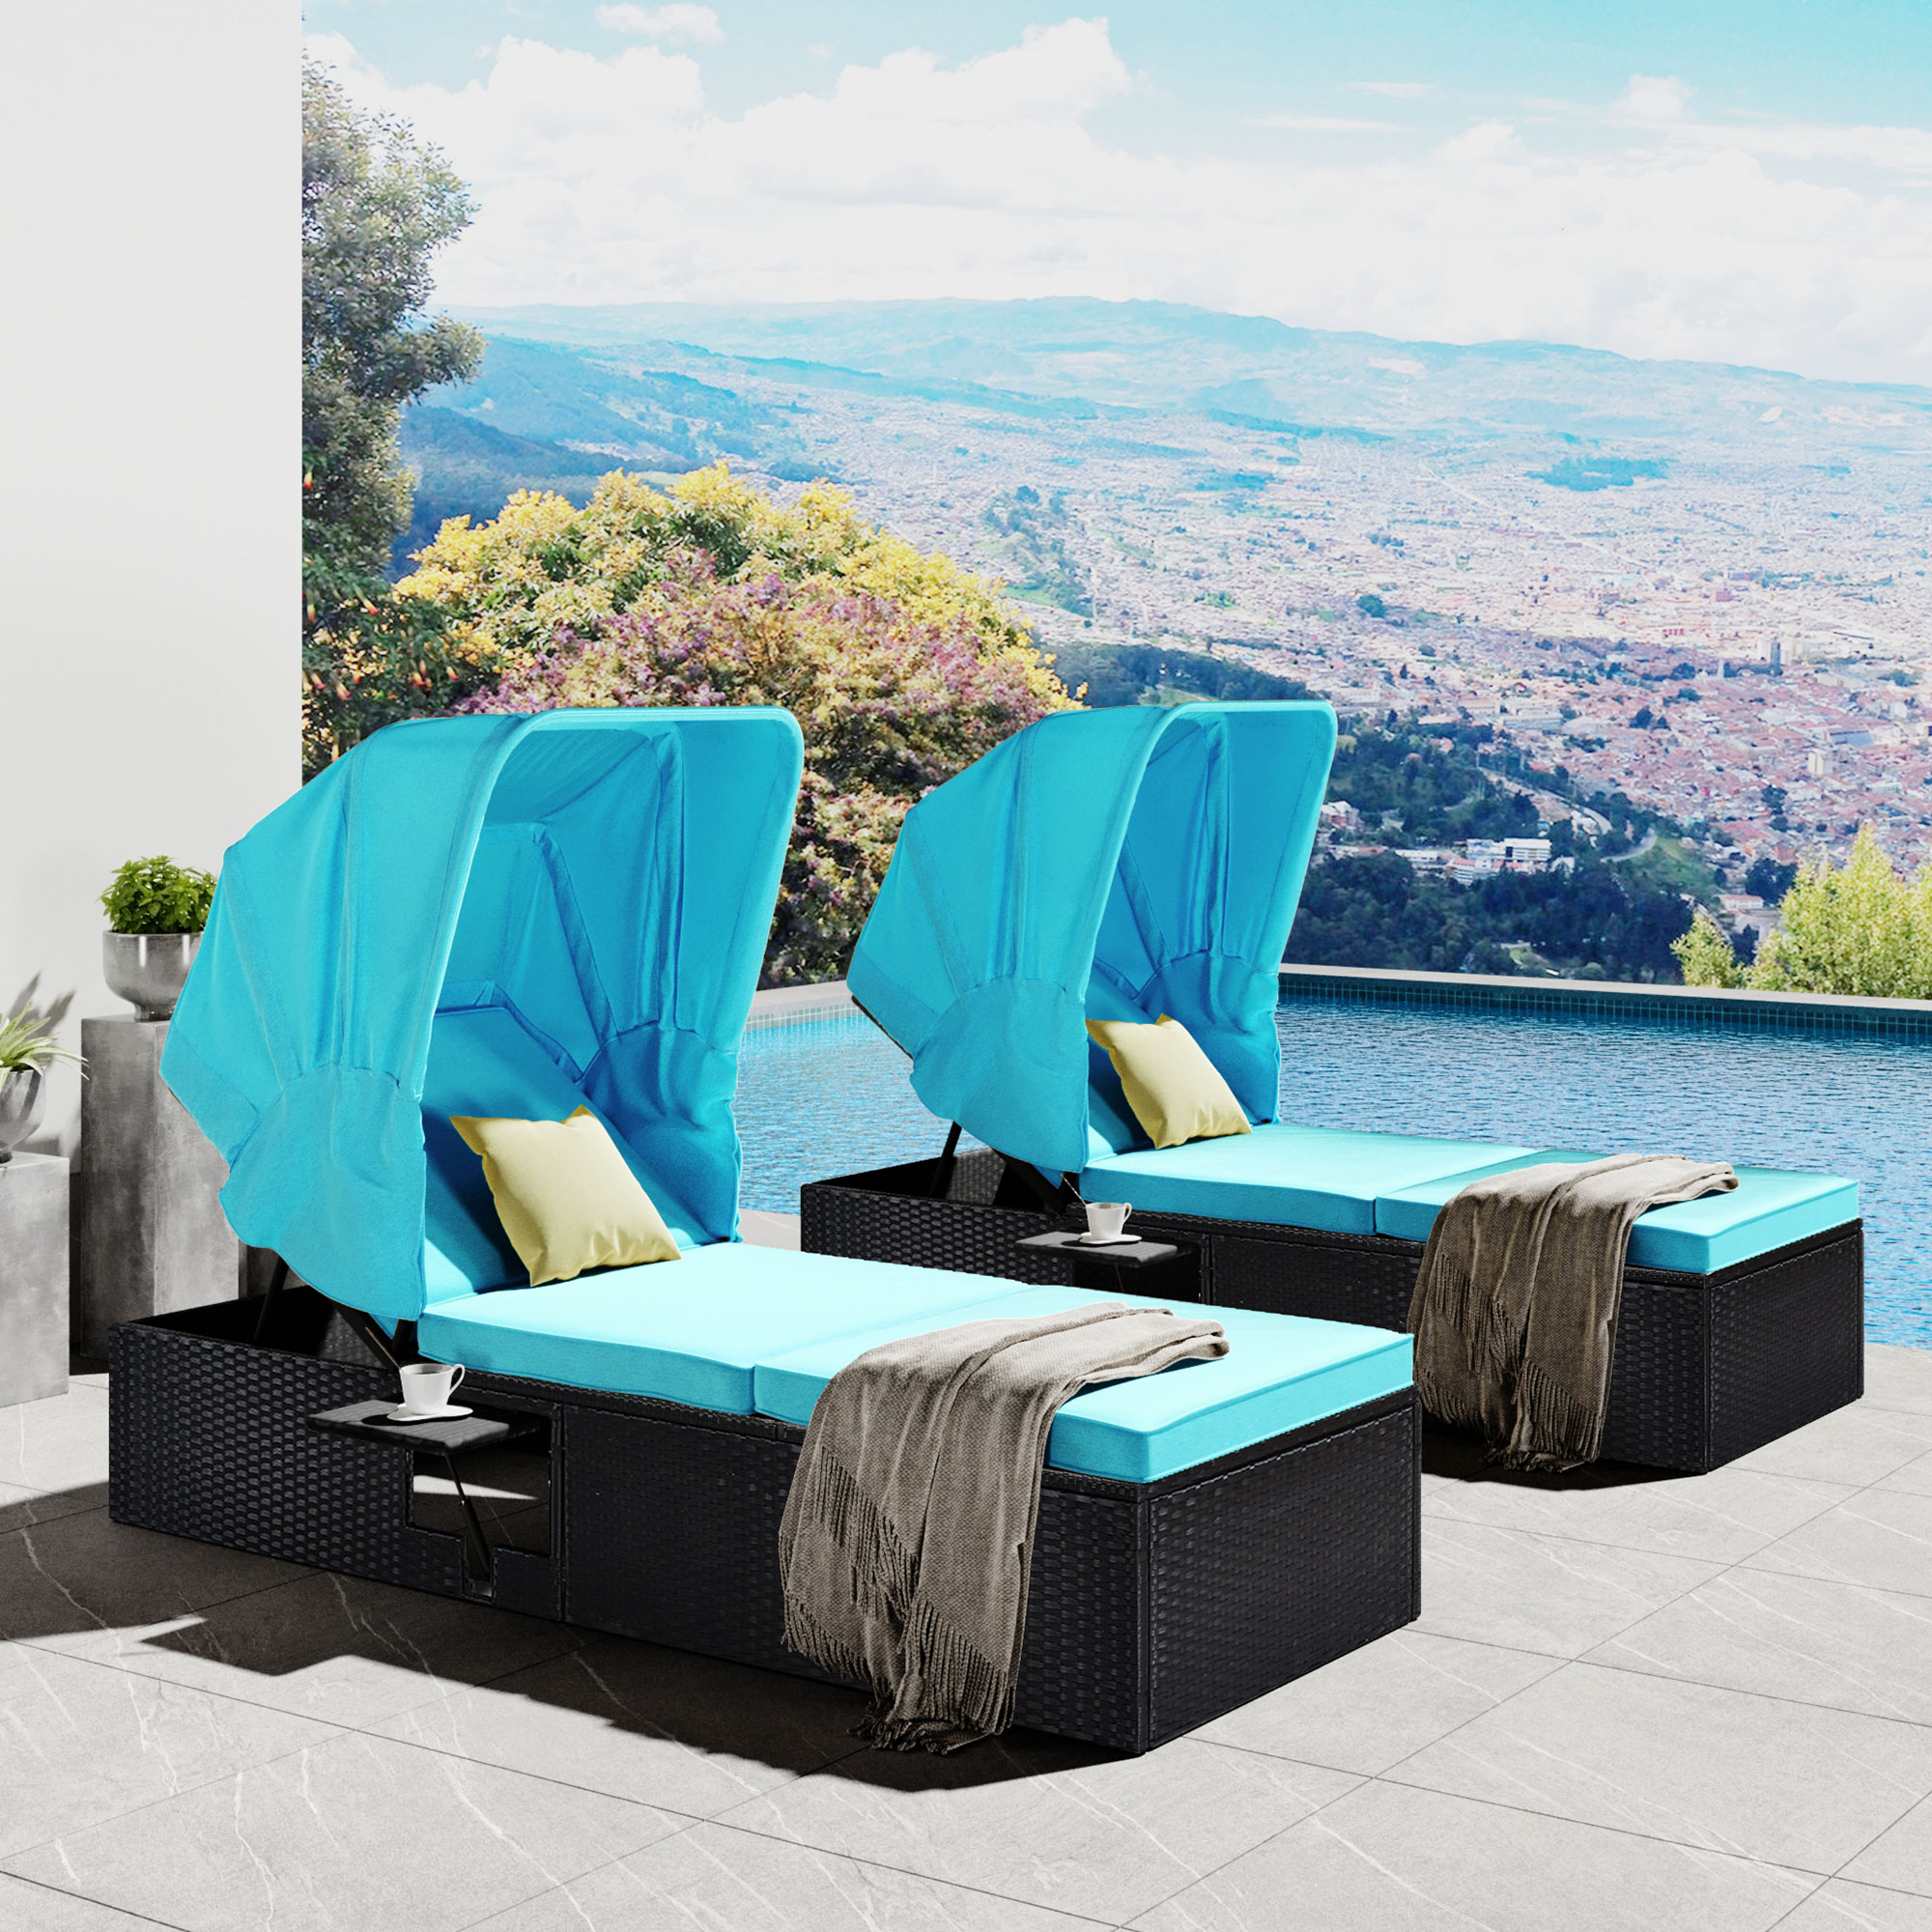 Outdoor PE Wicker Chaise Lounge, SYNGAR 2 Pieces Adjustable Reclining Chairs W/ Canopy and Cup Table, Patio Sun Lounger Set with Removable Cushion, Chaise Set for Poolside Garden Porch, Blue, D8760 - image 1 of 12